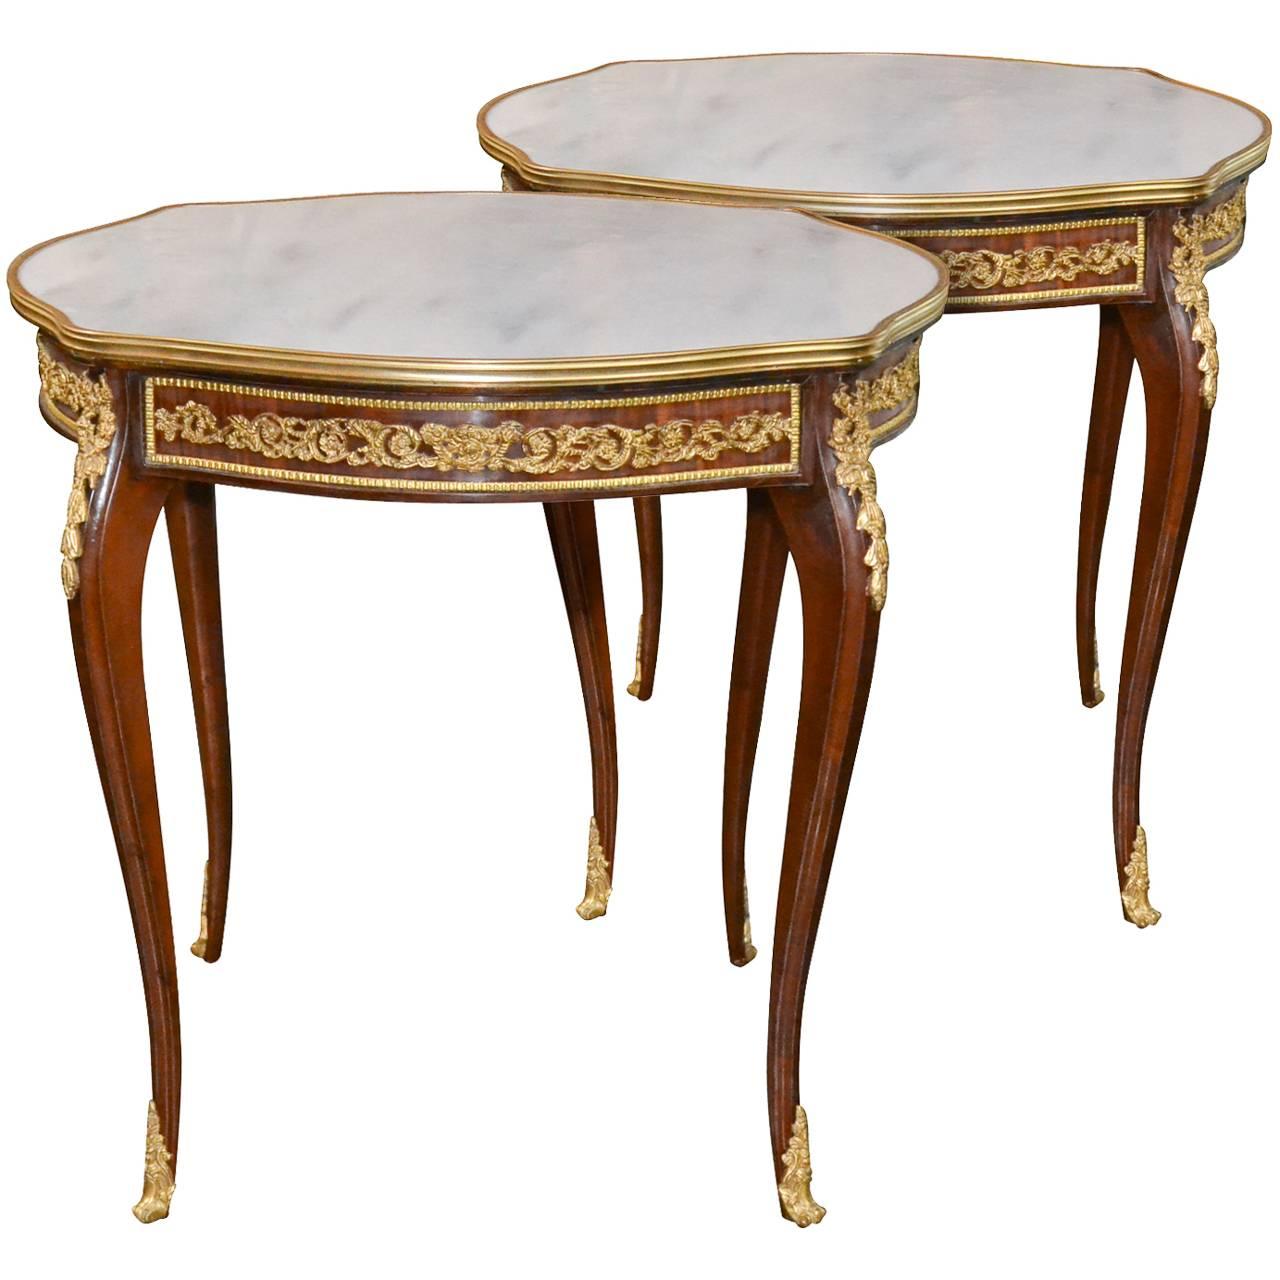 Excellent Pair of French Mahogany Side Tables